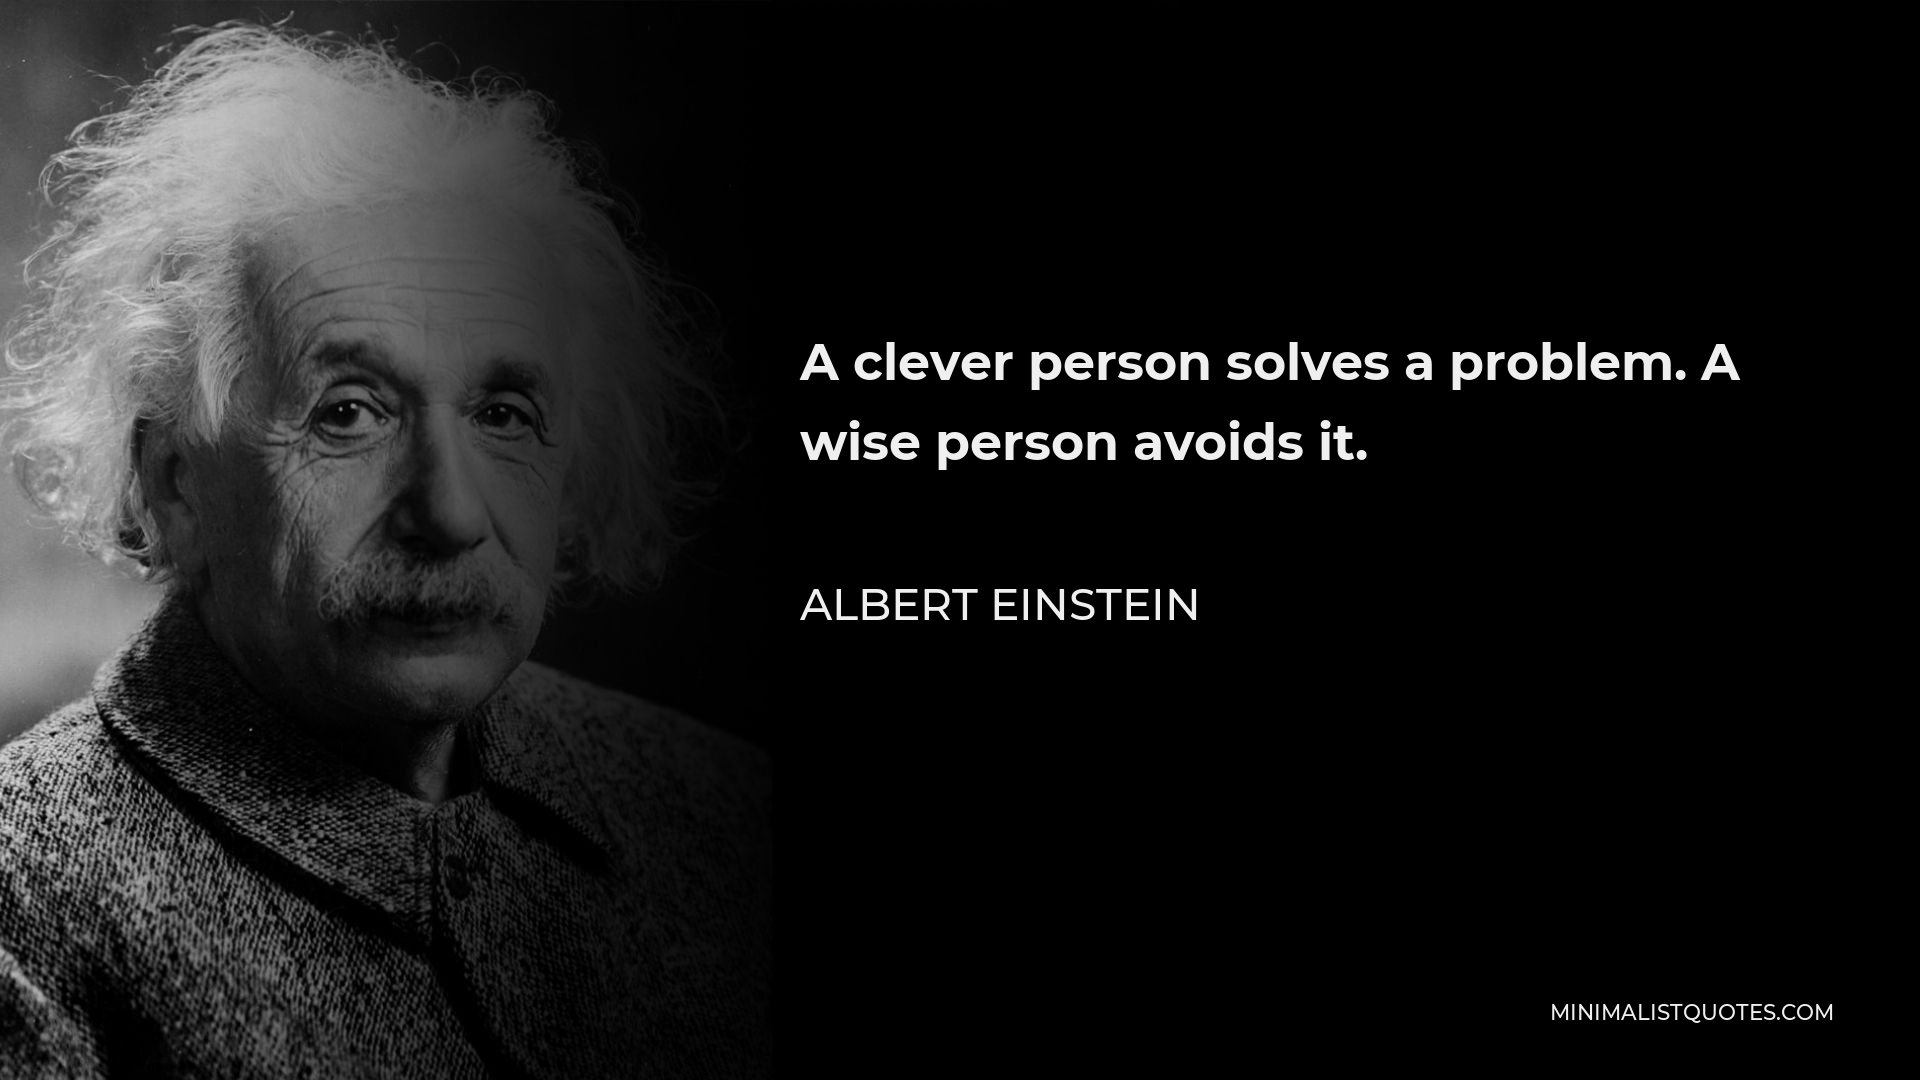 Albert Einstein Quote - A clever person solves a problem. A wise person avoids it.